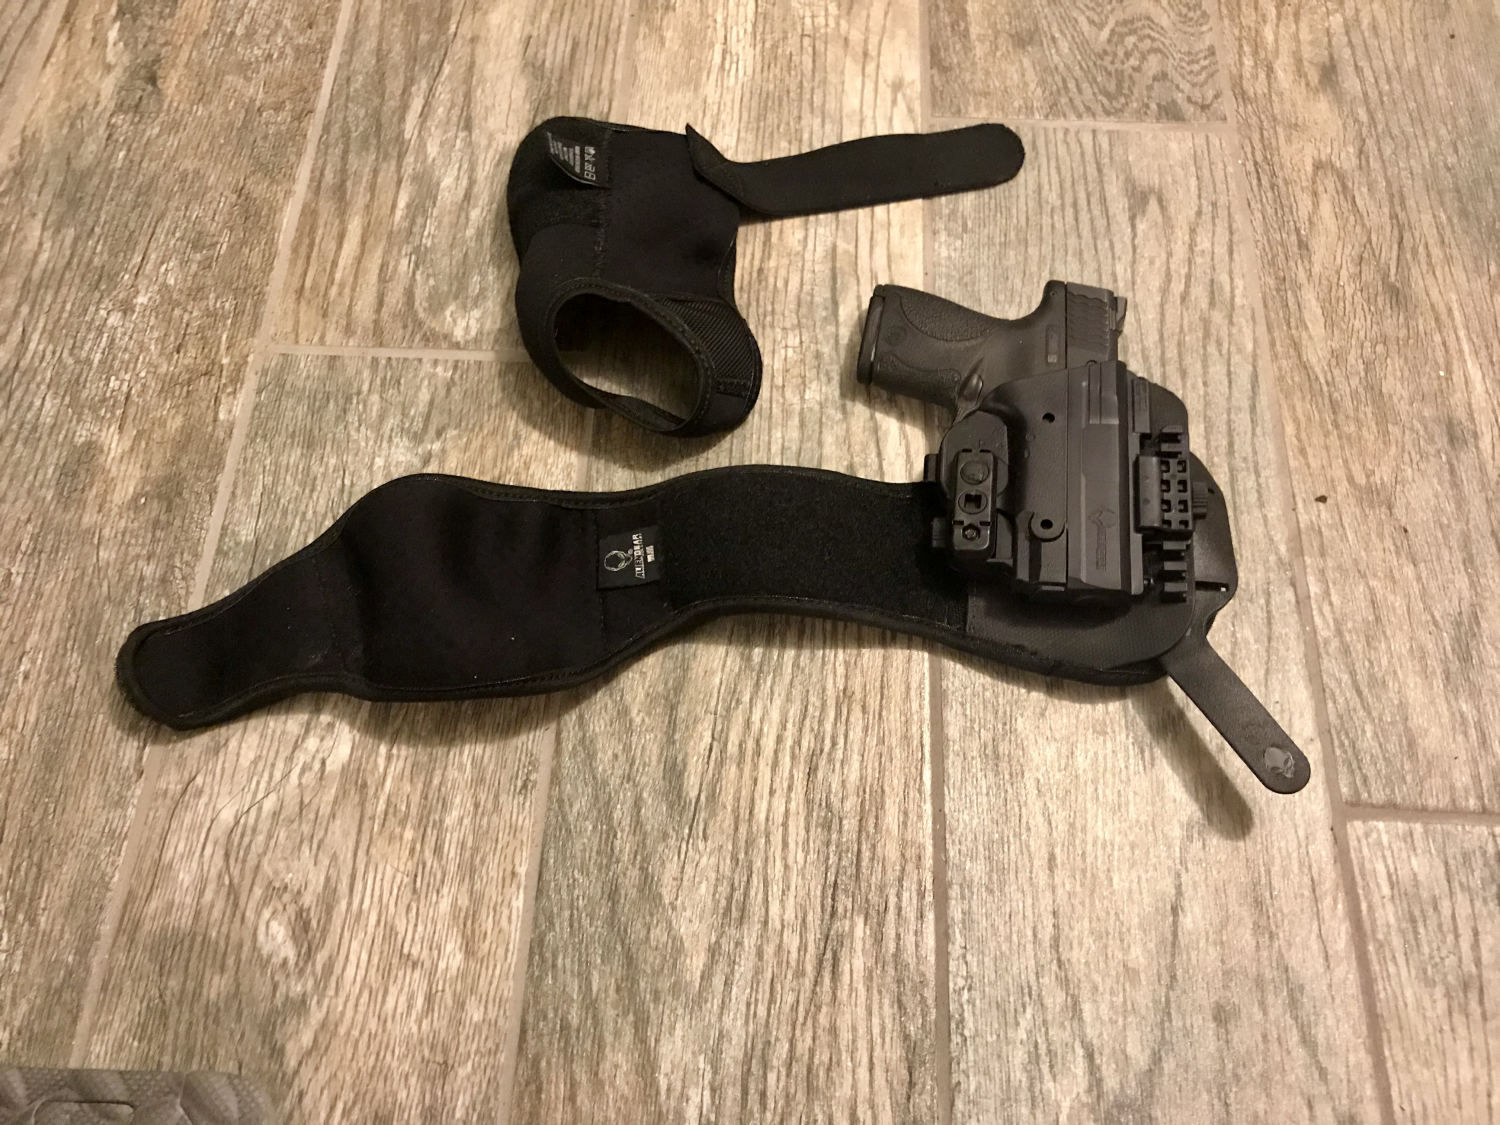 The lower wrap on top, the upper wrap with my M&P Shield. Note the “spine” on the lower right of the holster, complete with little alien head.